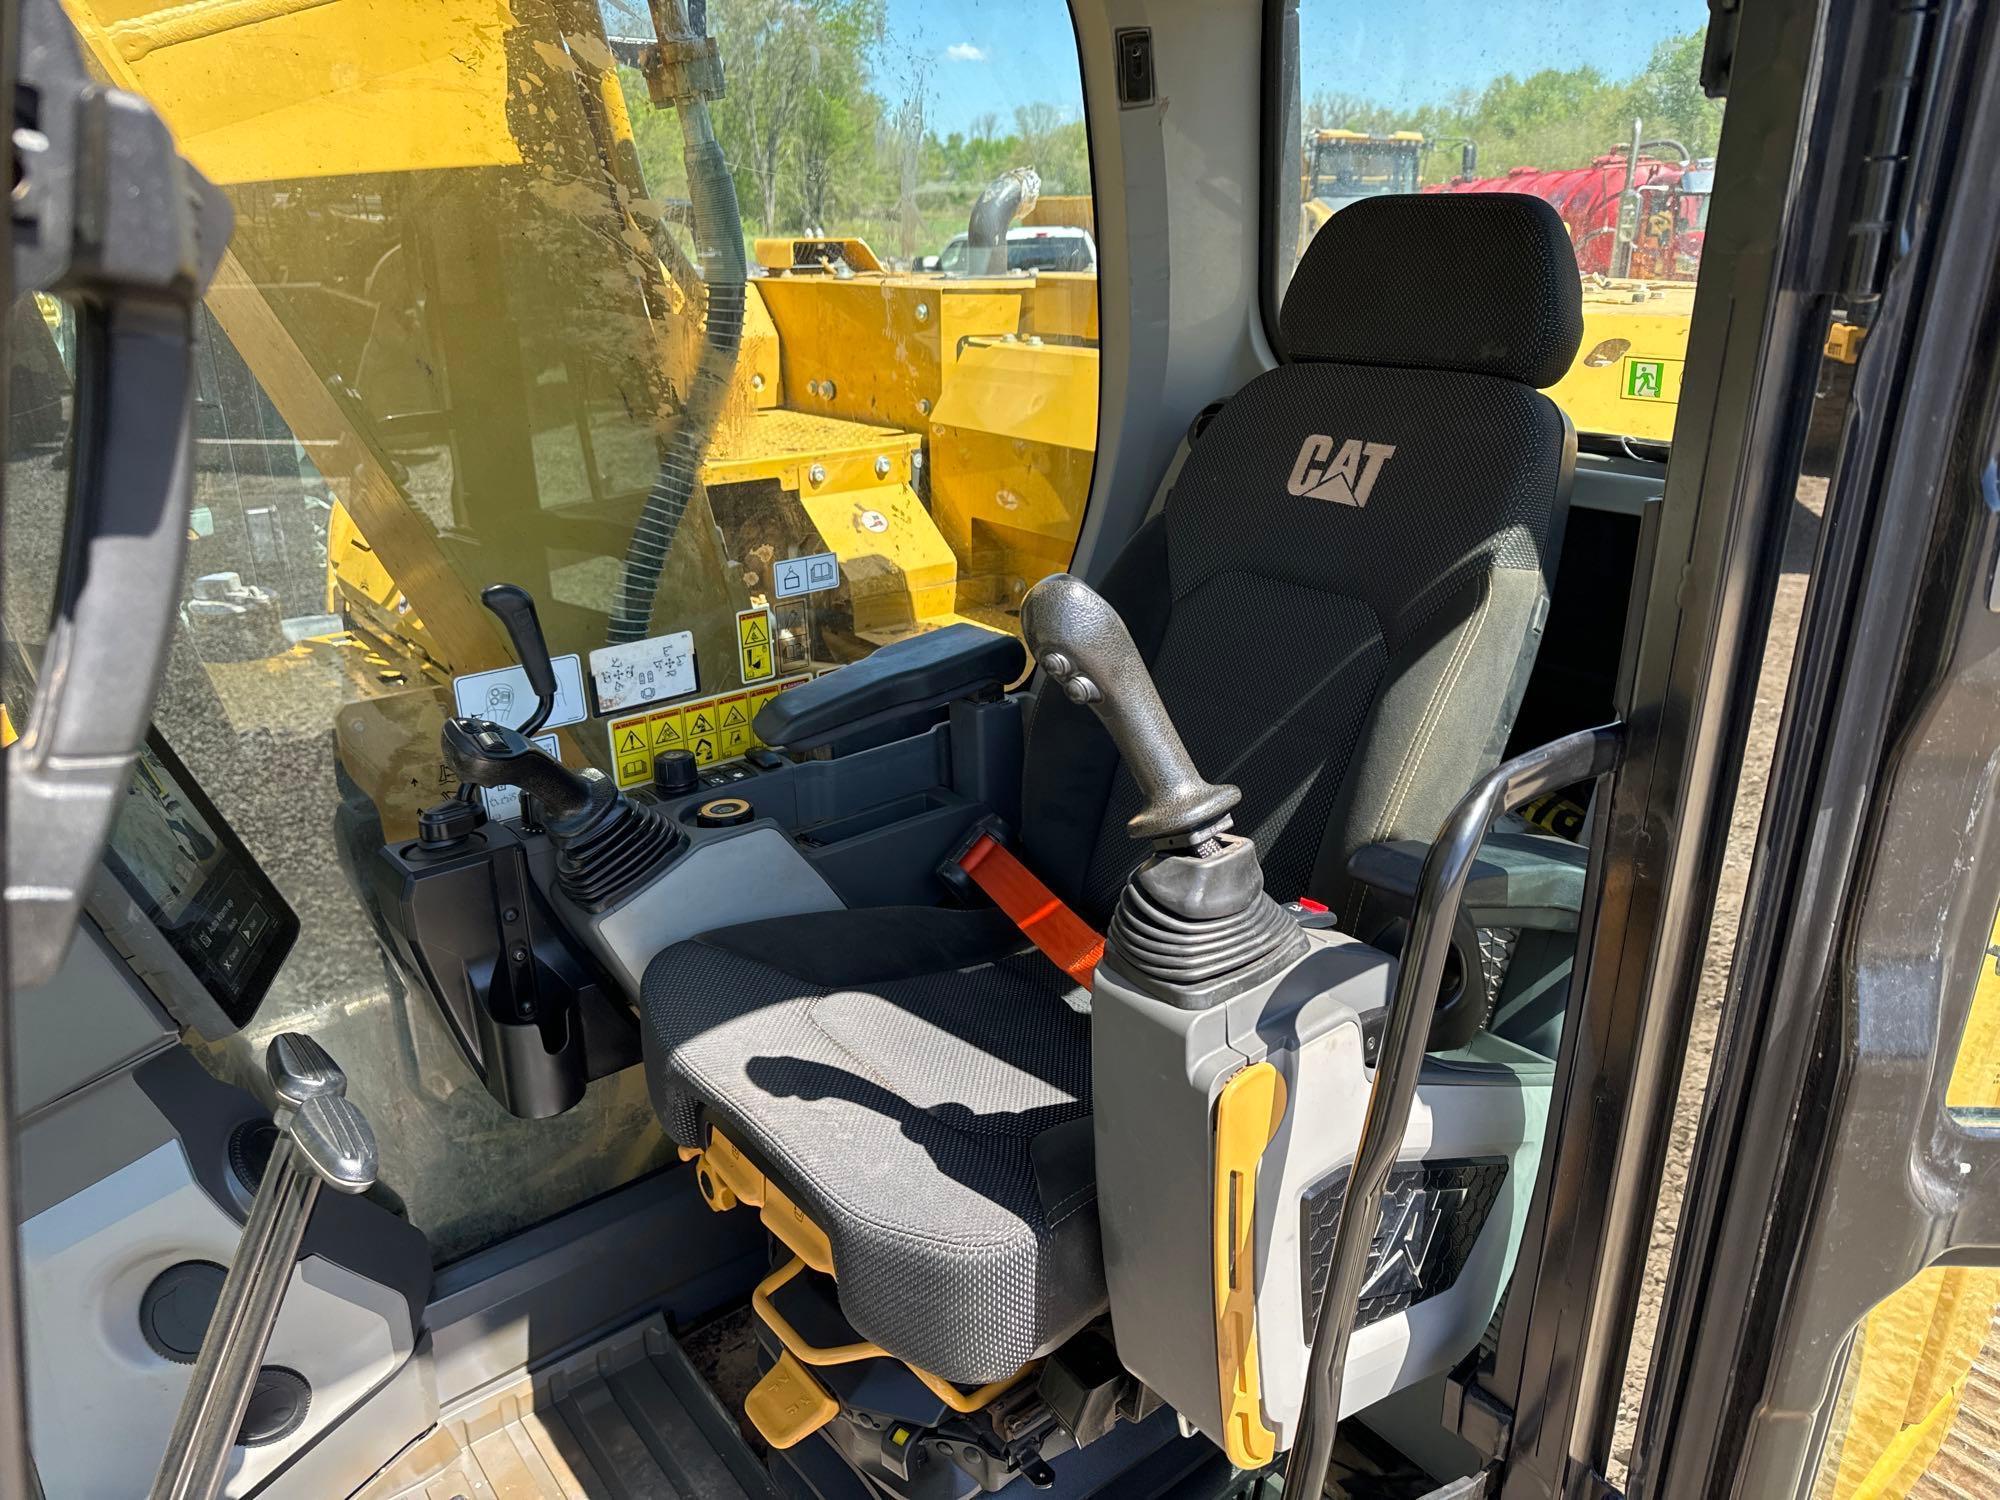 2021 CAT 315 HYDRAULIC EXCAVATOR SN:WKX10733 powered by Cat diesel engine, equipped with deluxe cab,